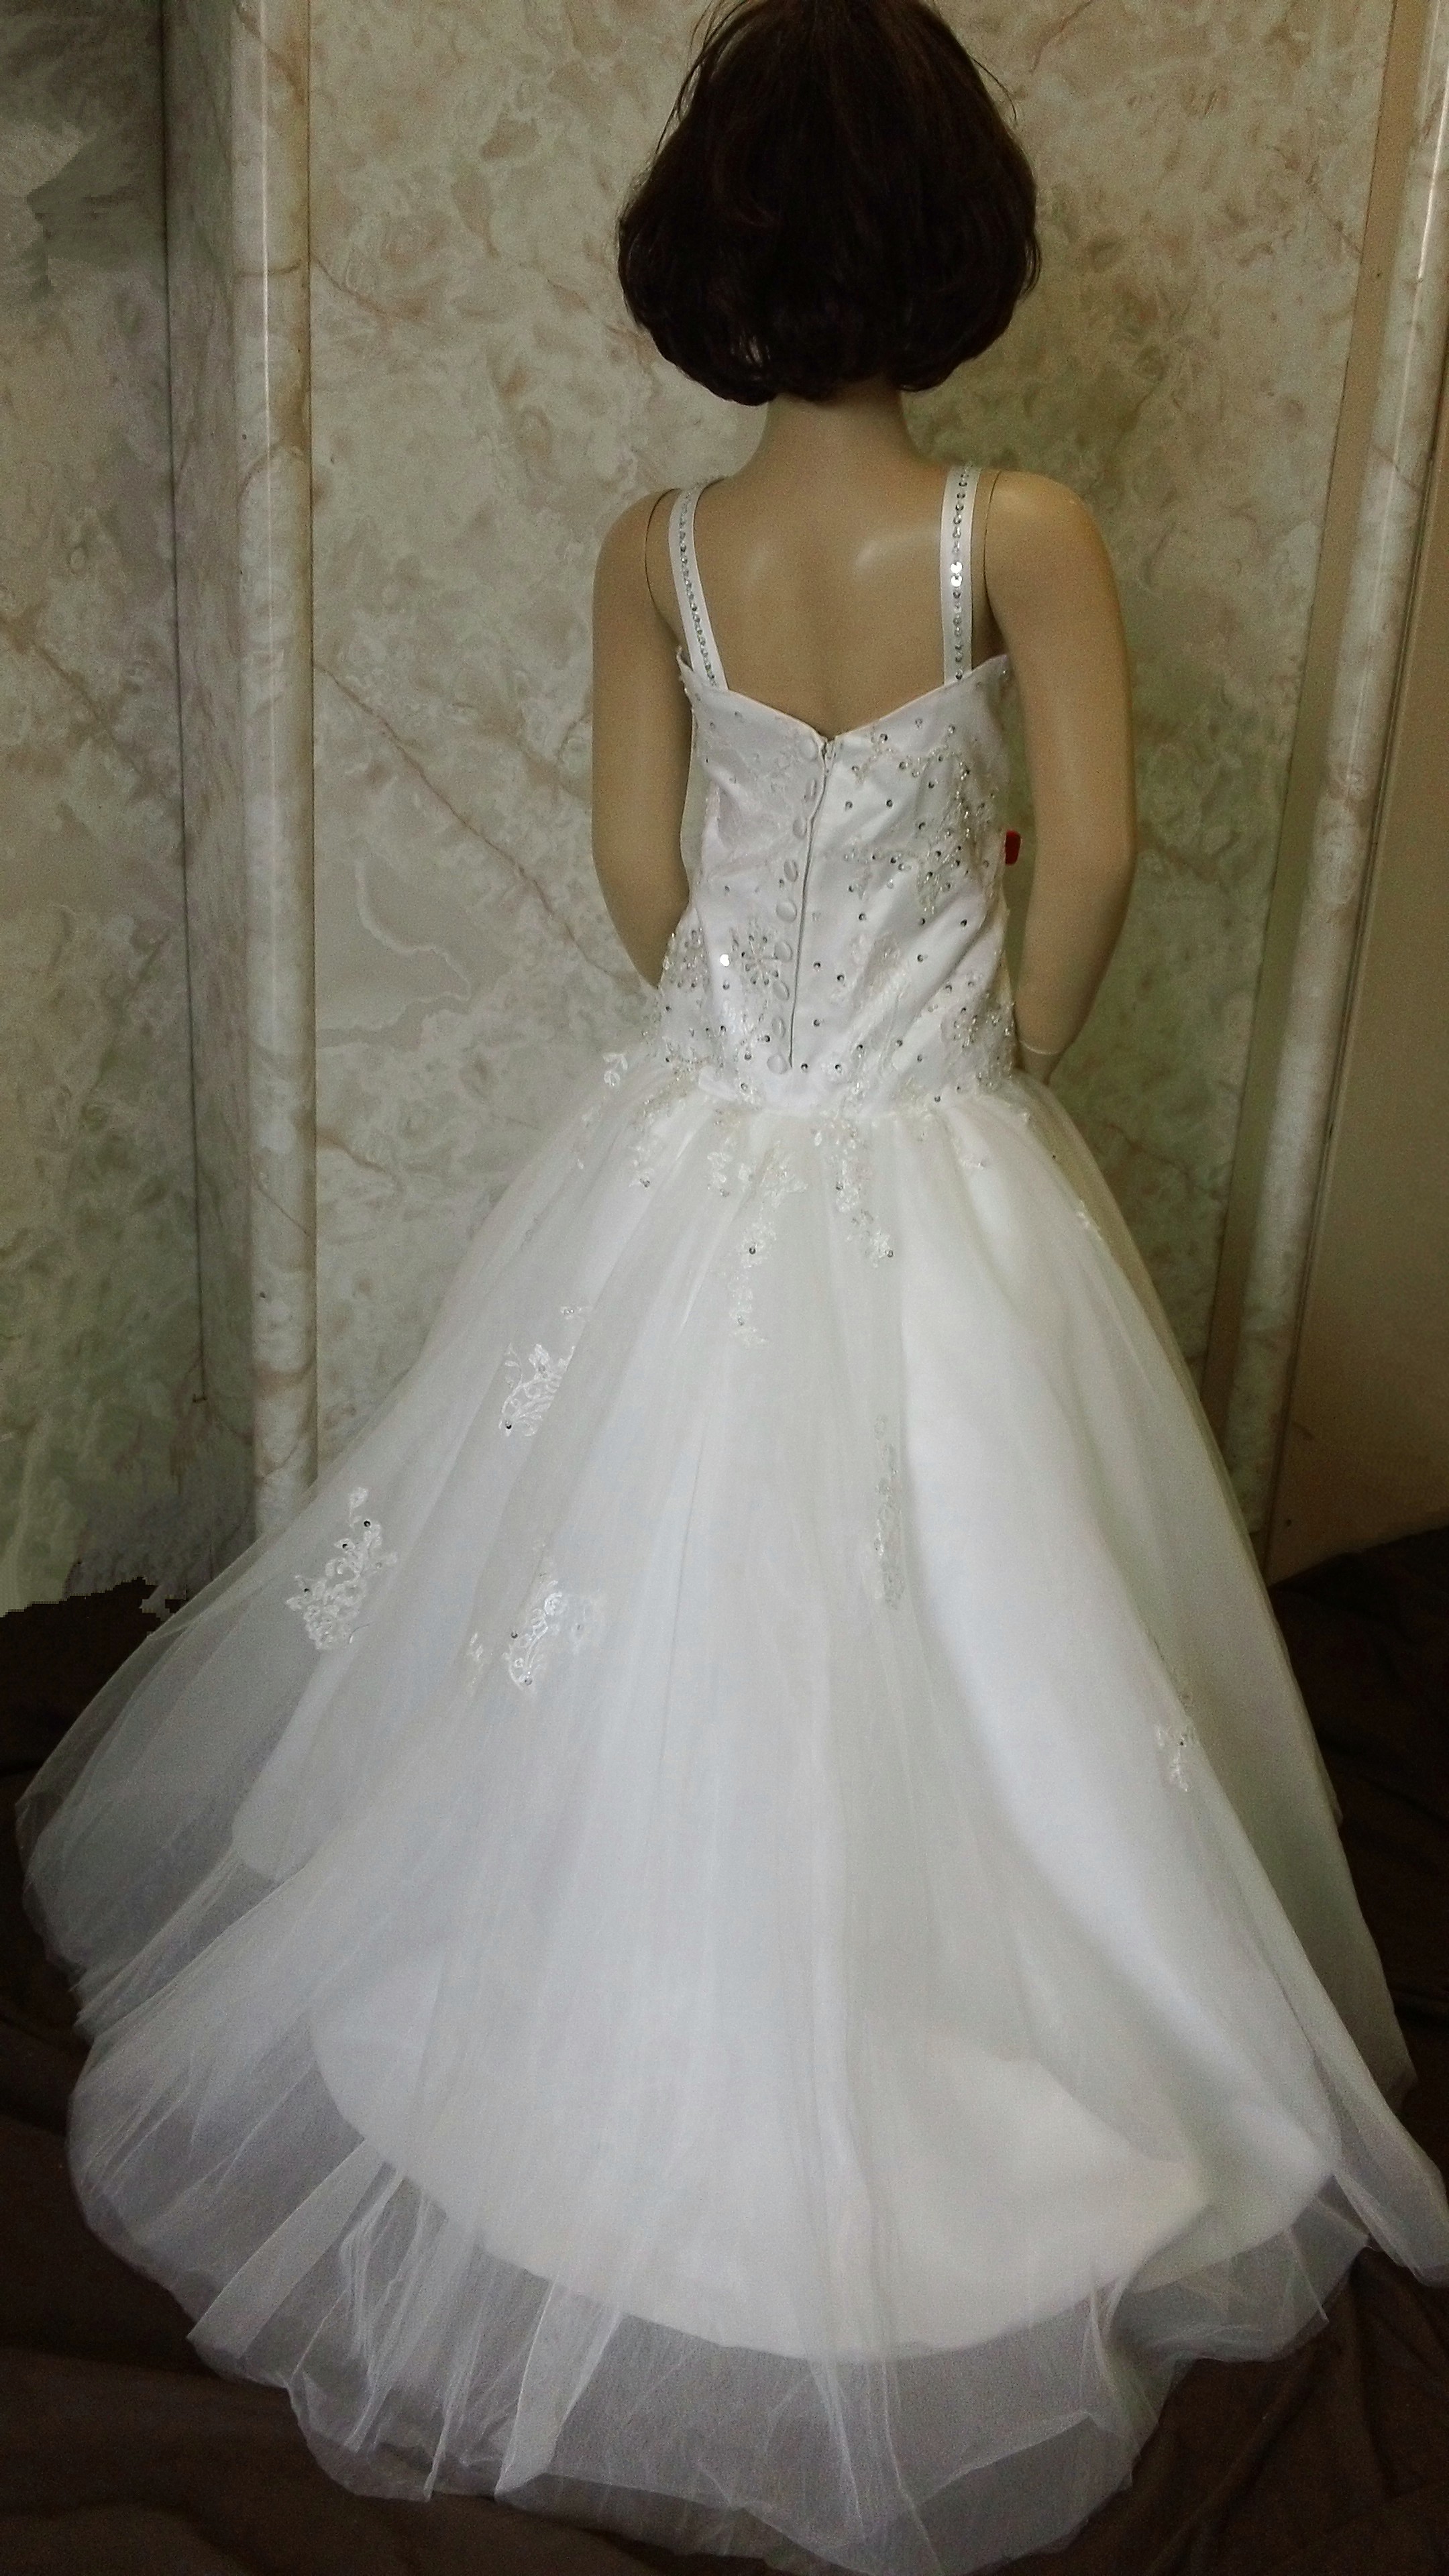 Miniature wedding gown with train